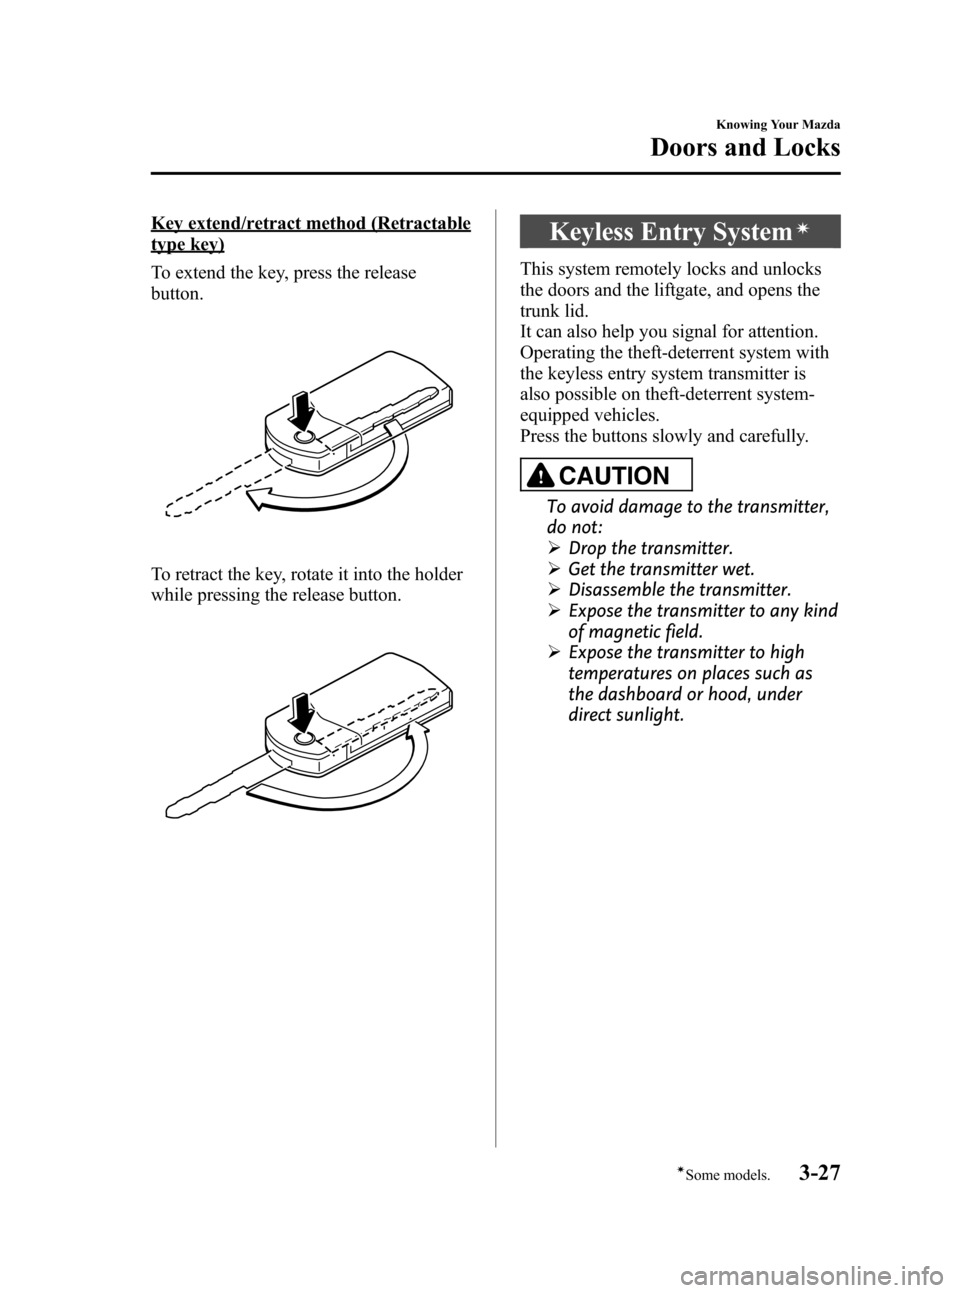 MAZDA MODEL 3 HATCHBACK 2010  Owners Manual (in English) Black plate (103,1)
Key extend/retract method (Retractable
type key)
To extend the key, press the release
button.
To retract the key, rotate it into the holder
while pressing the release button.
Keyle